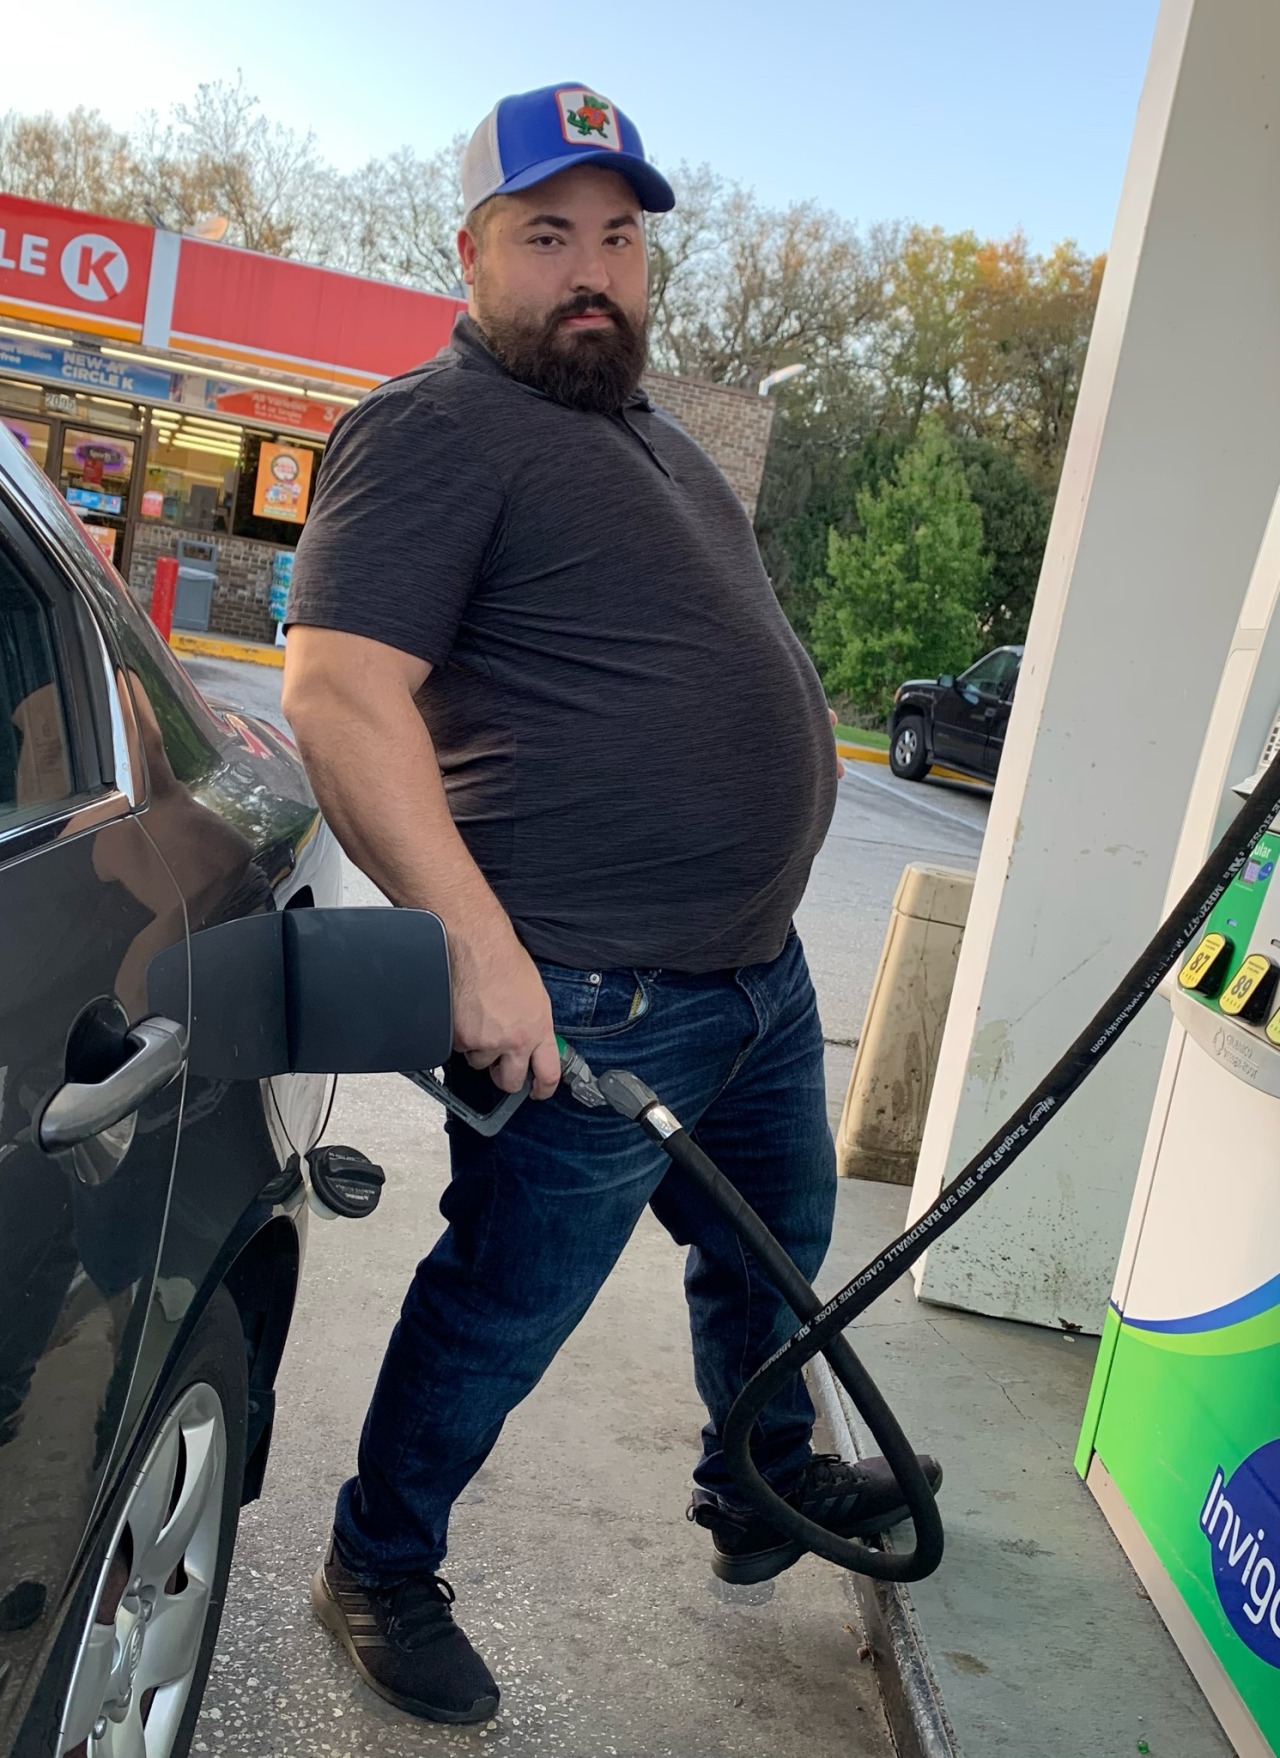 alphabelly:I’m hungry af and this slow ass gas pump is holding me up from getting to my gains. Better go inside and get a candy bar!